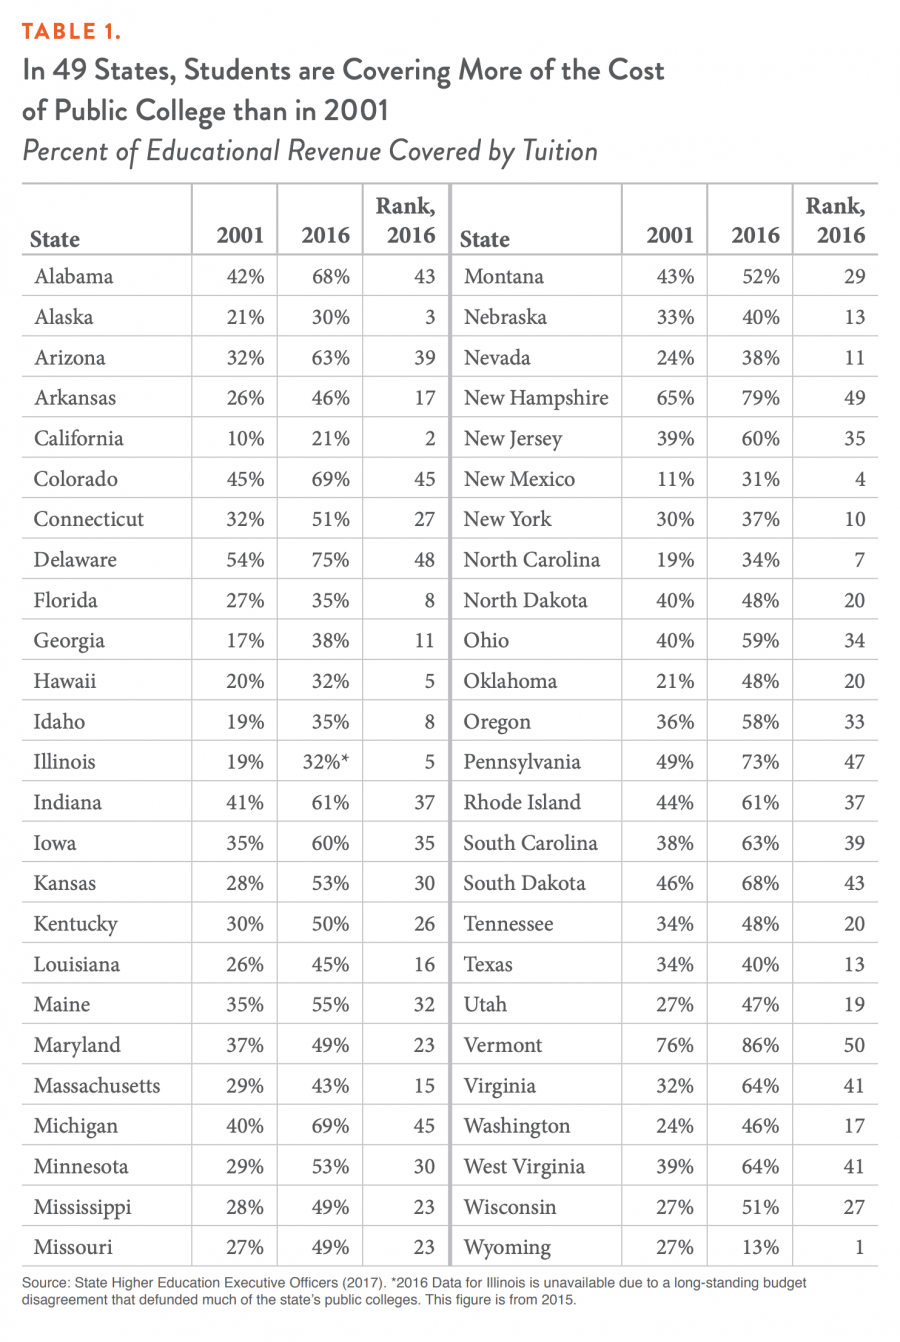 TABLE 1. In 49 States, Students are Covering More of the Cost of Public College than in 2001 